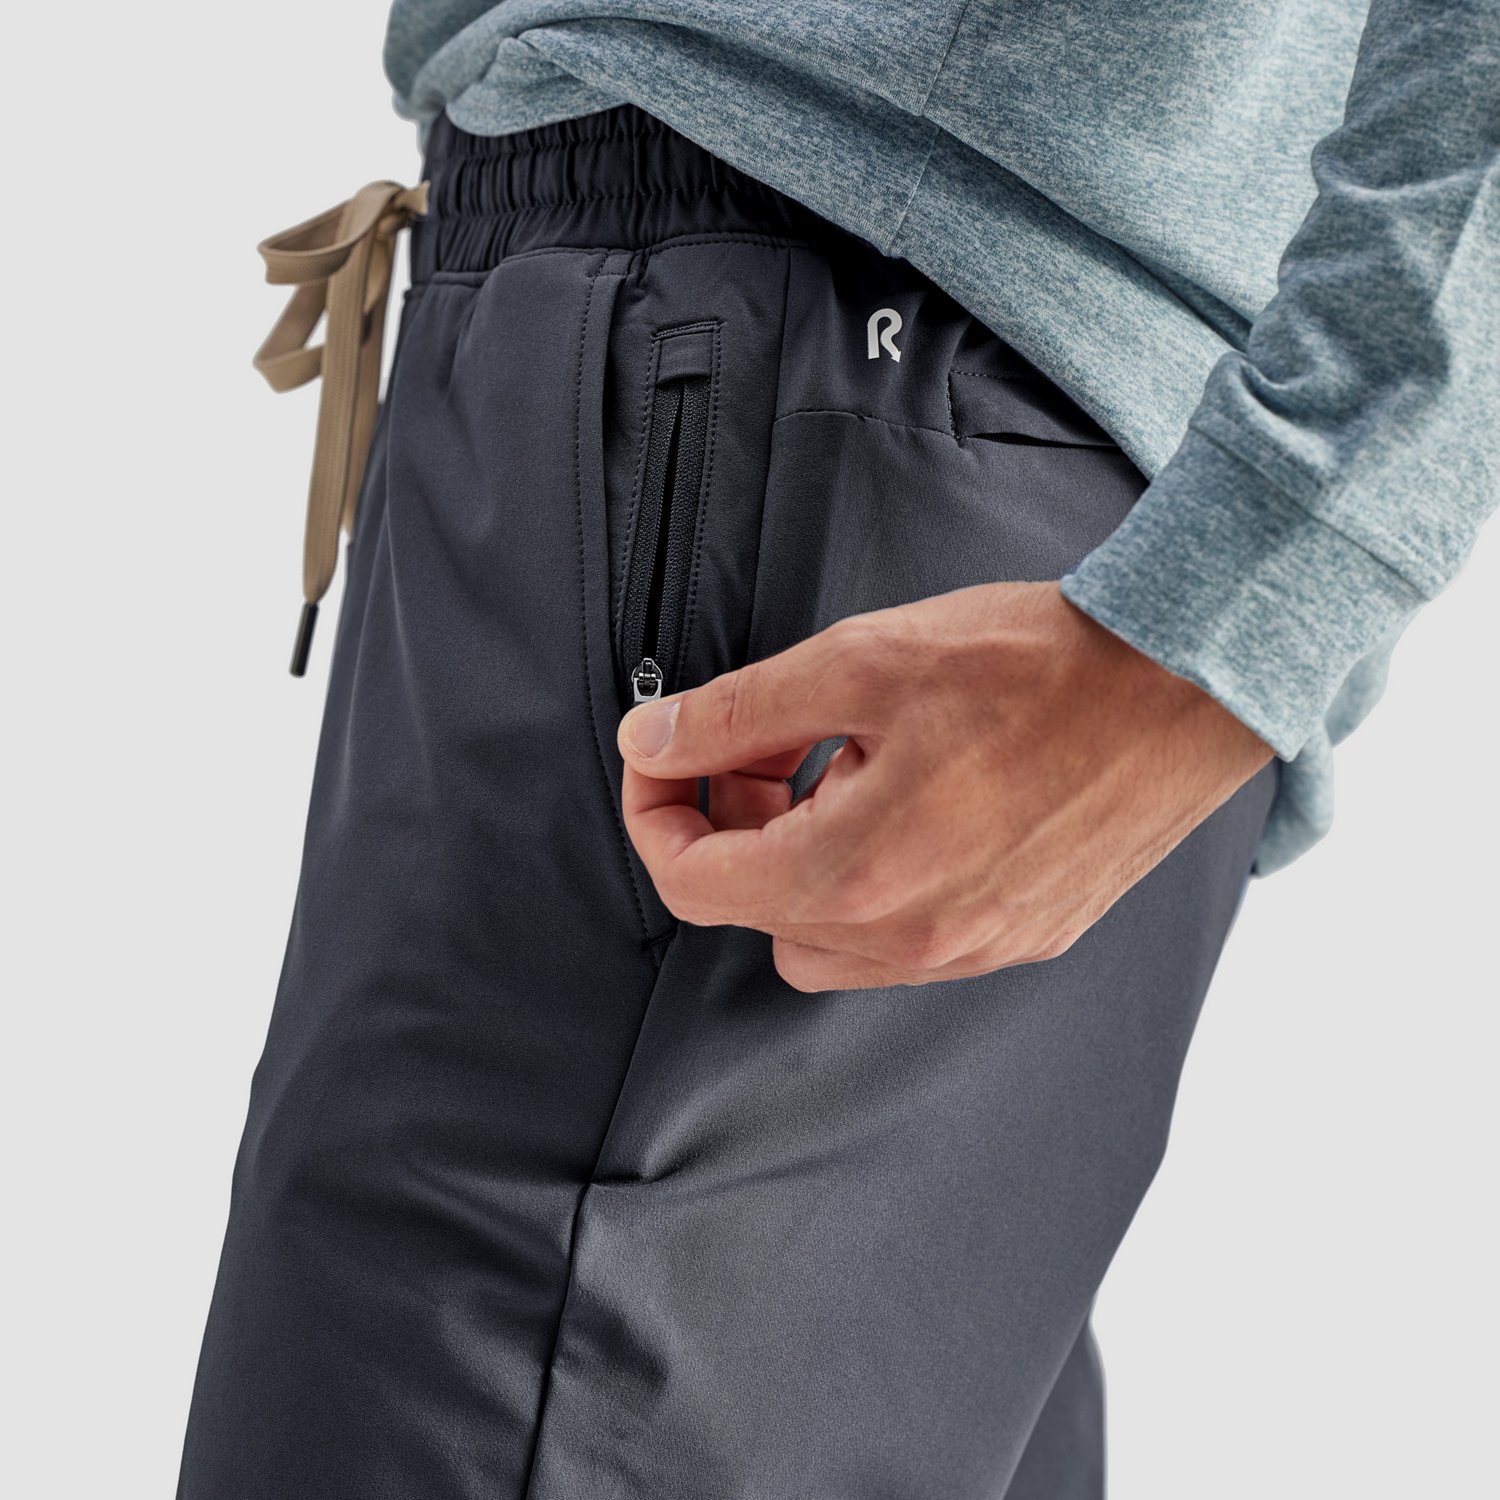 R.O.W. Men's Arise Pants | Free Shipping at Academy